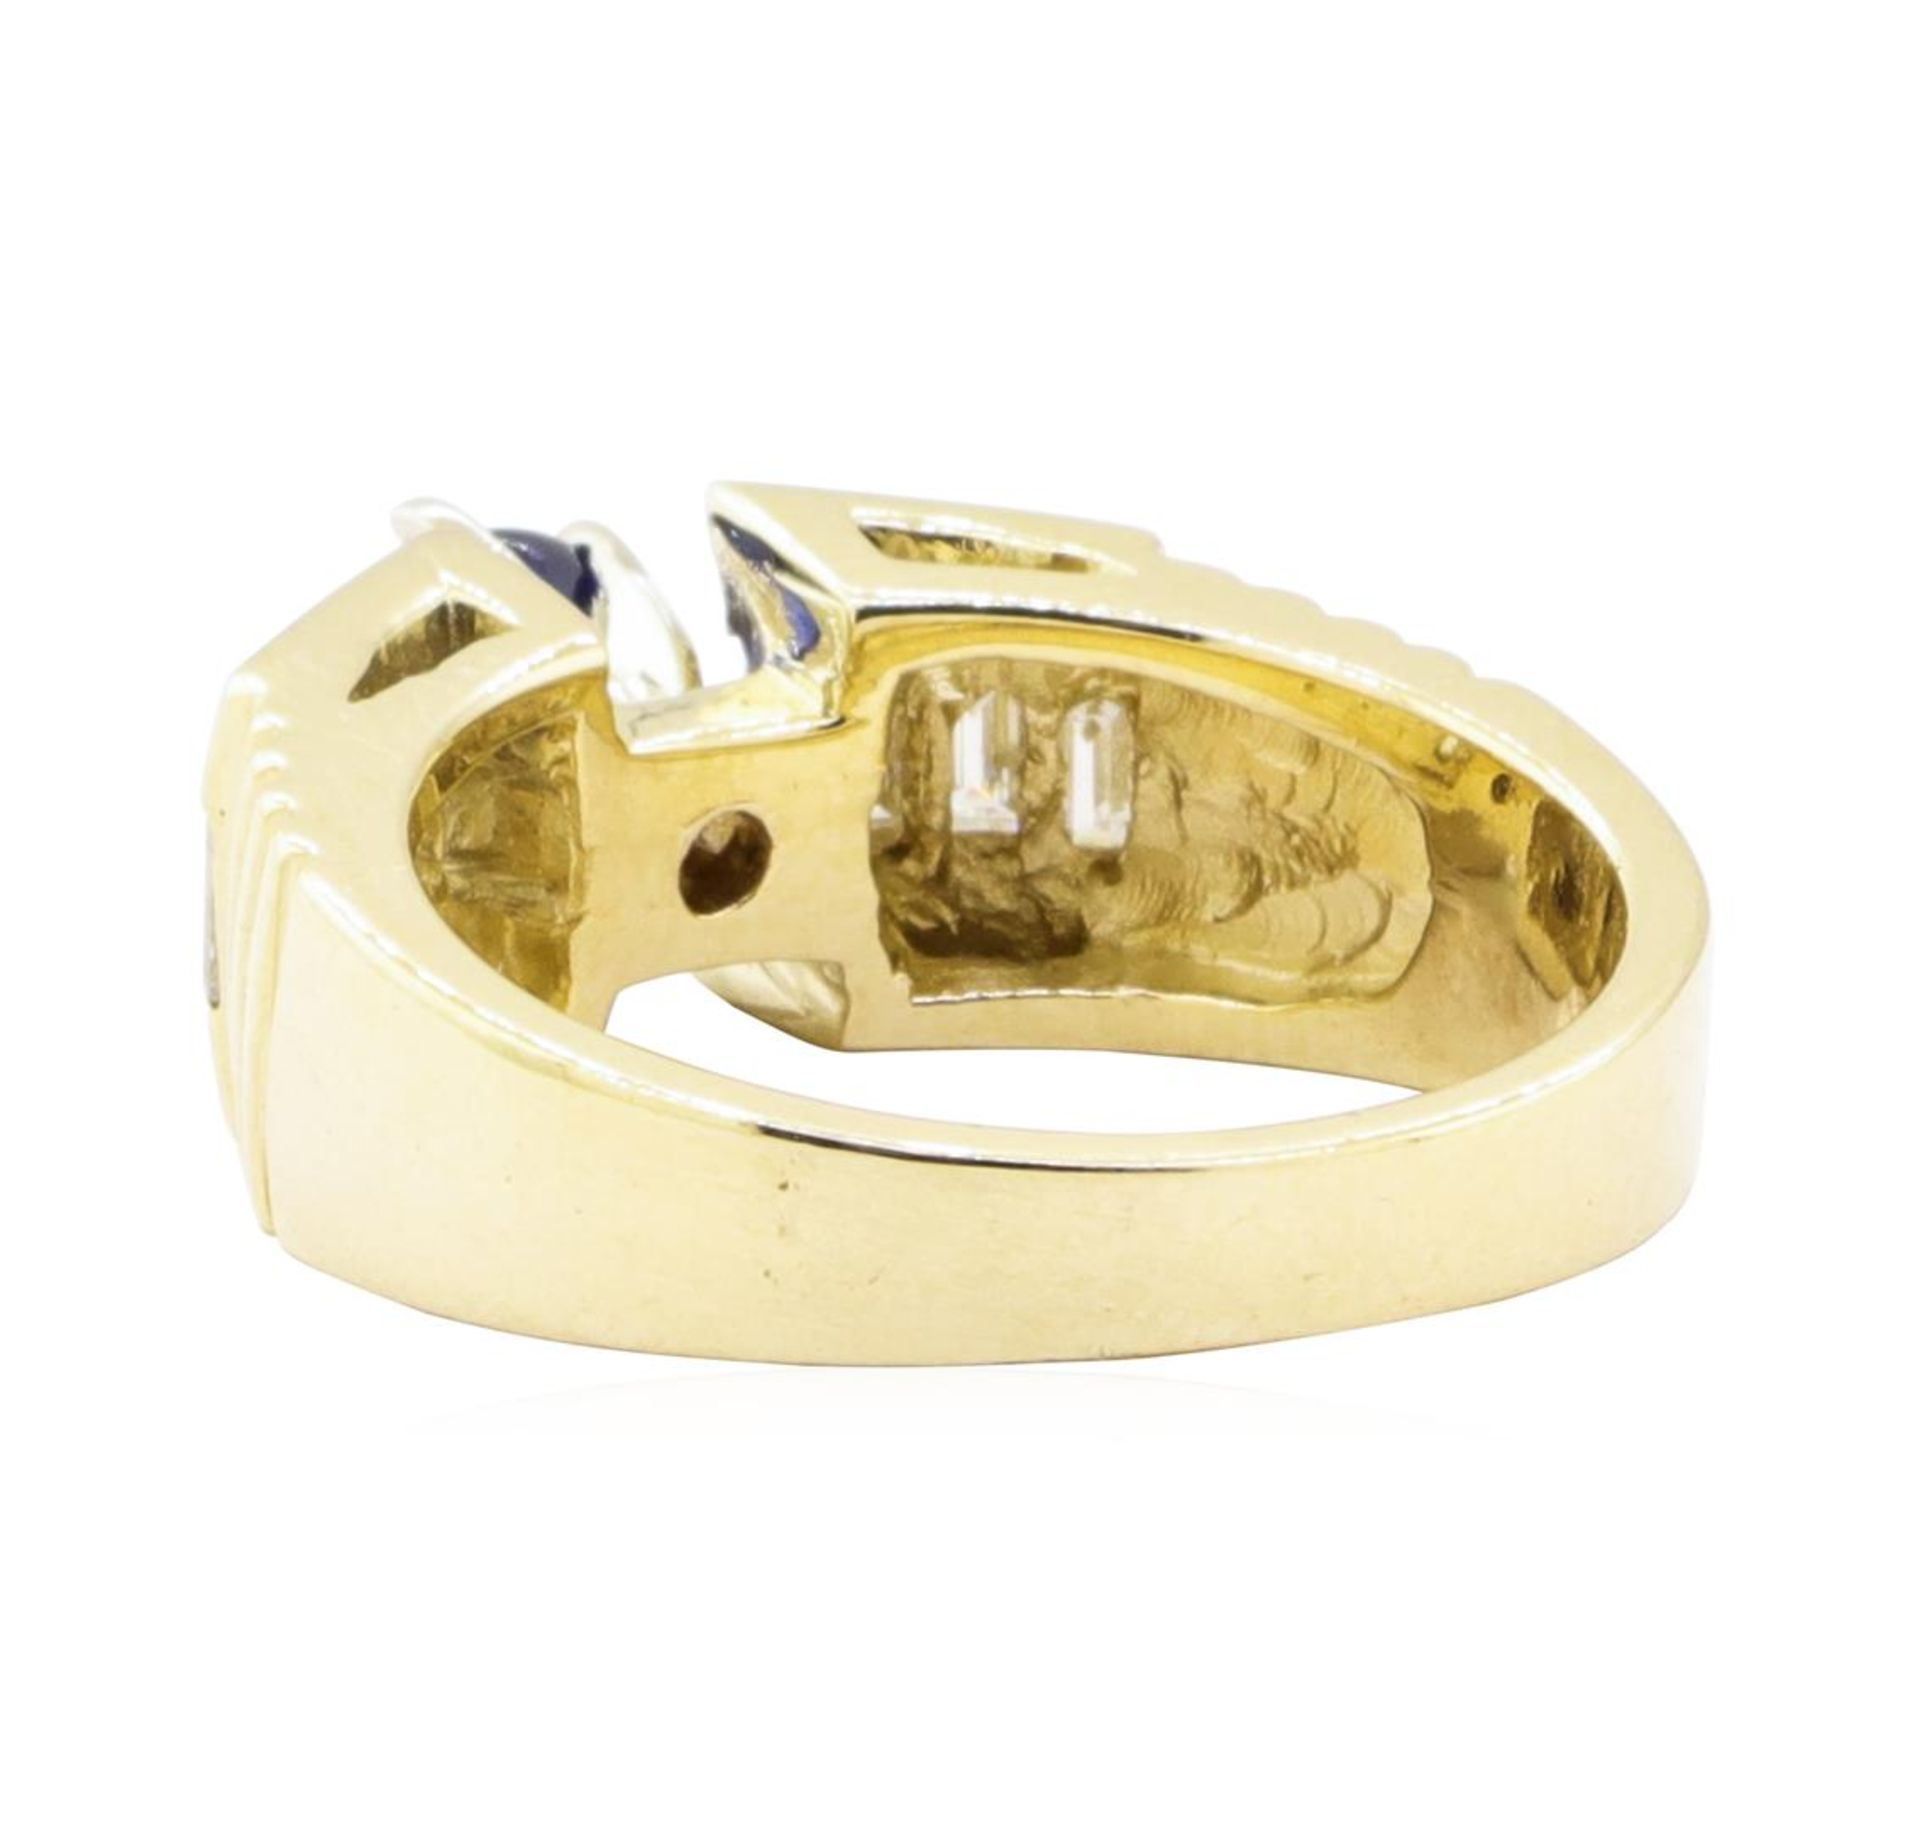 1.30 ctw Sapphire and Diamond Ring - 14KT Yellow Gold - Image 3 of 4